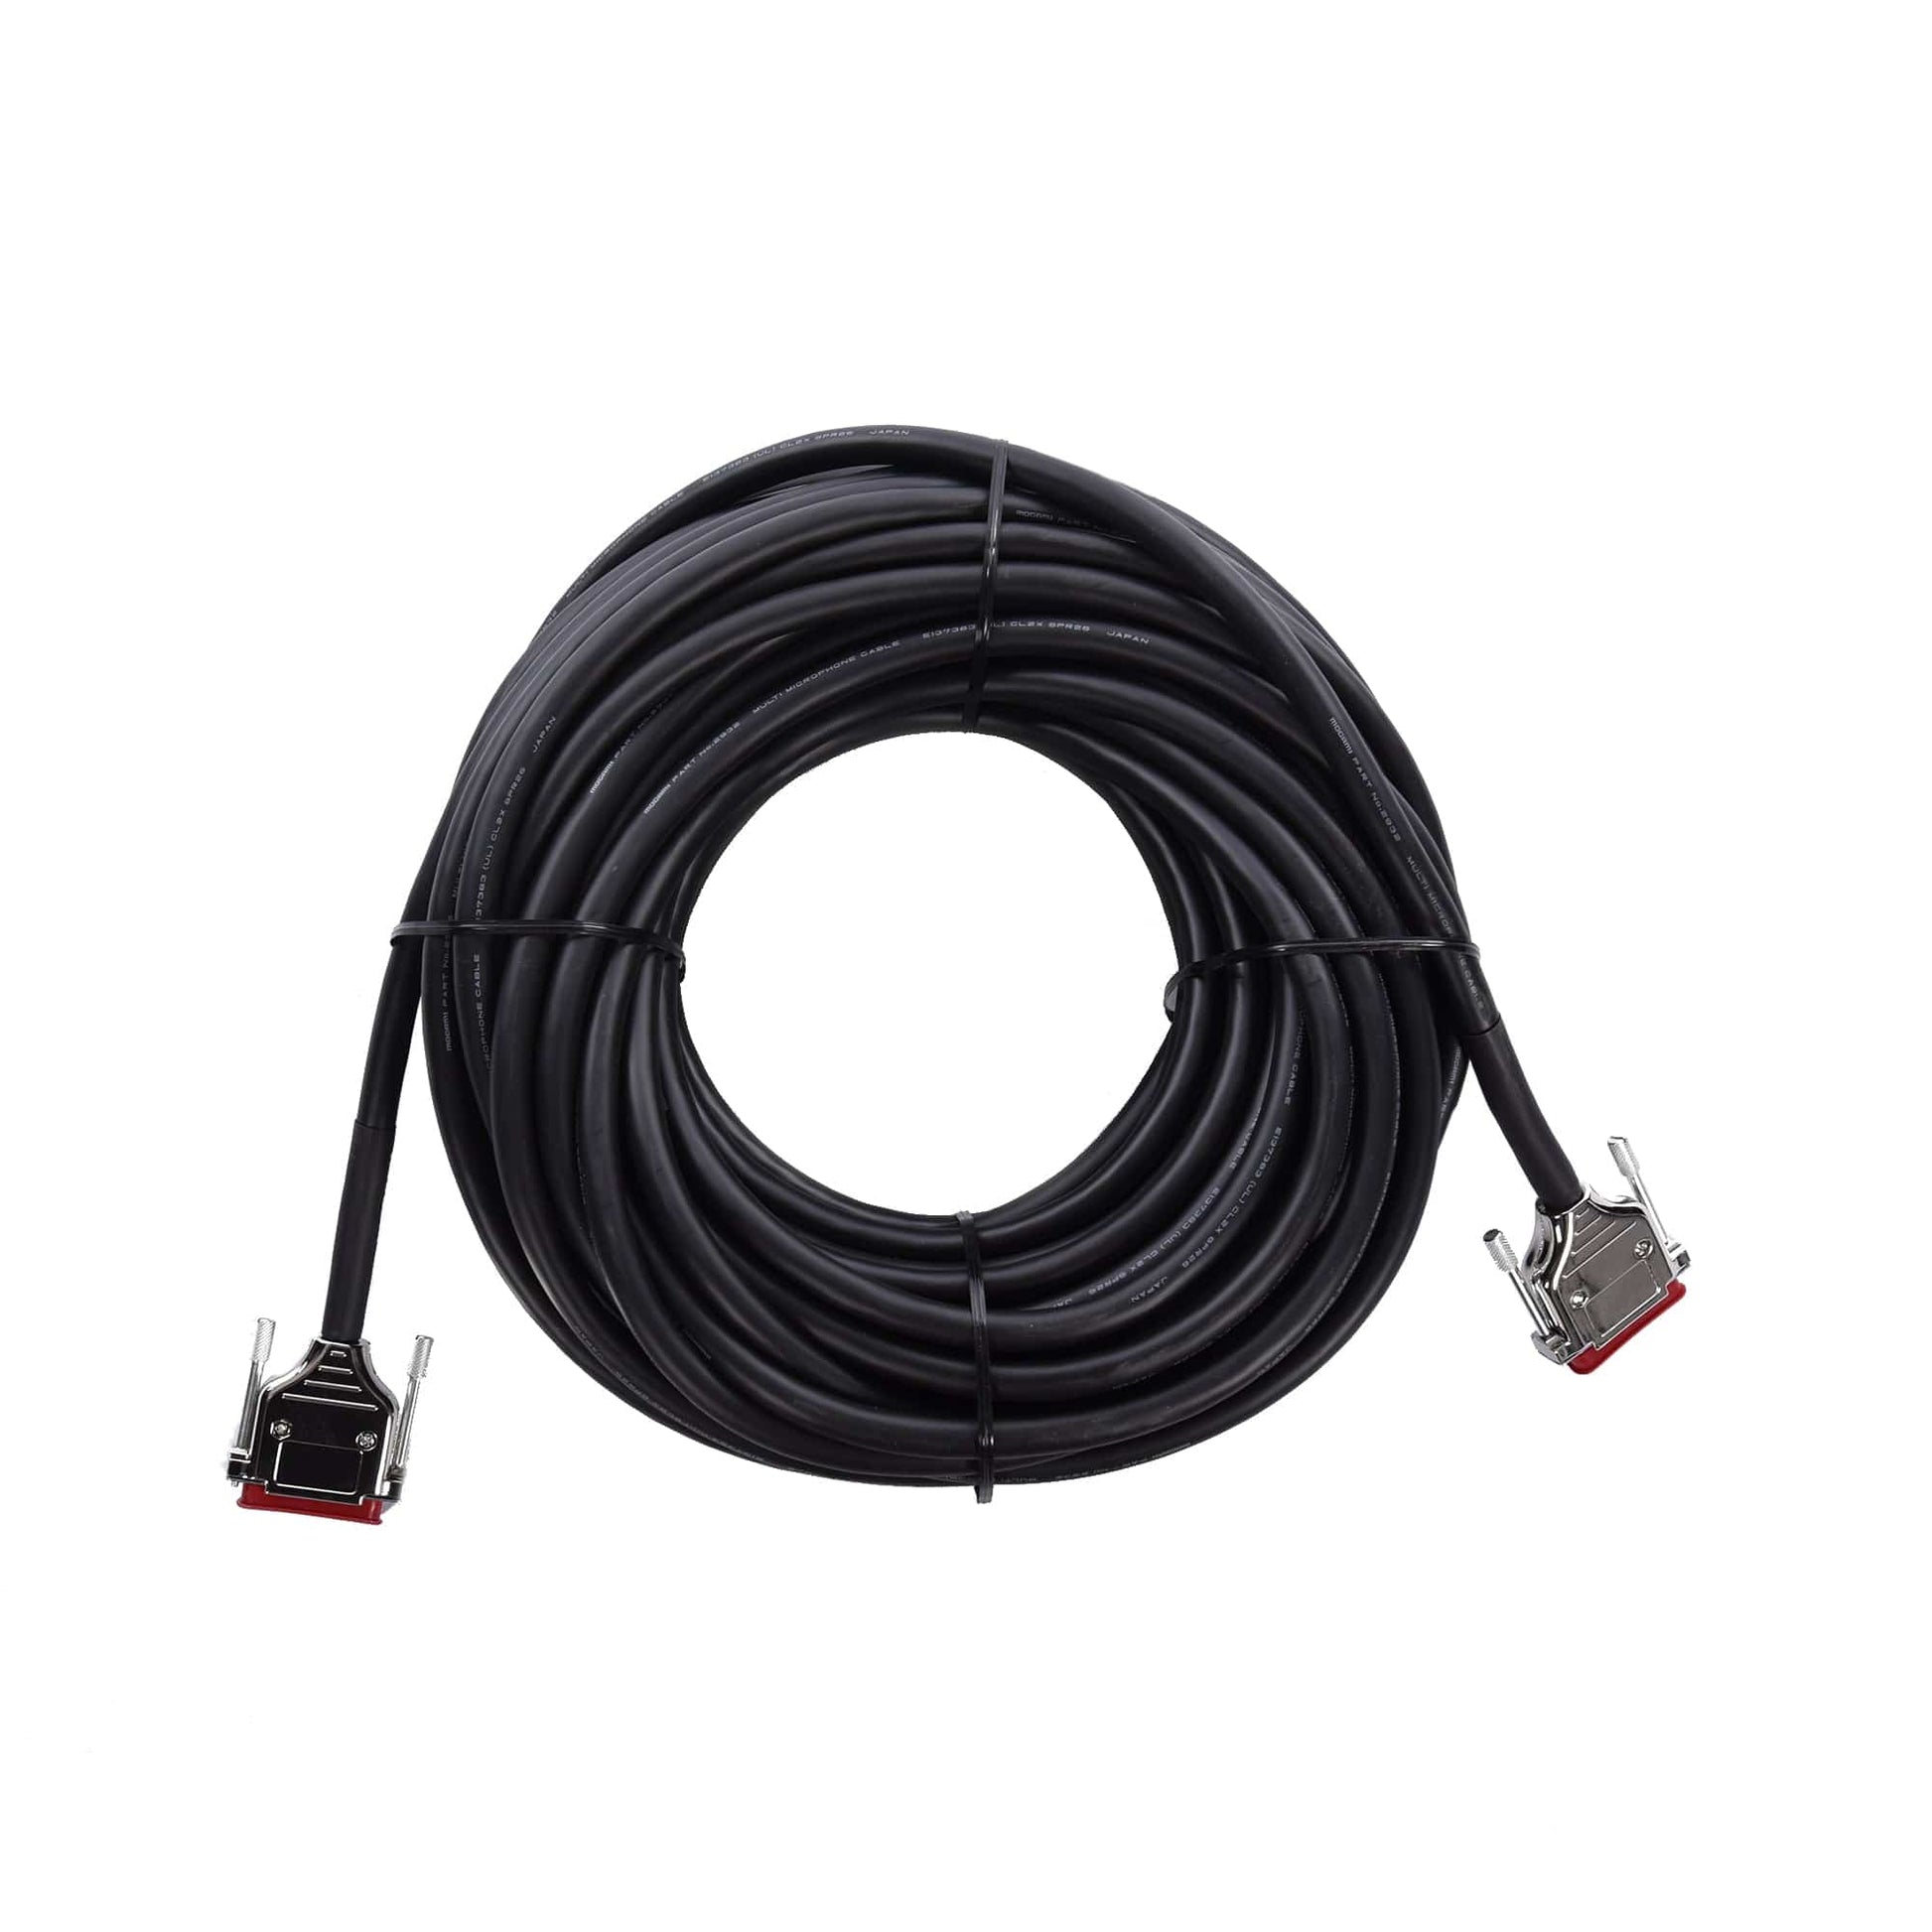 Mogami Gold DB25-DB25 8-channel Analog Interface Cable 100' Accessories / Cable Adapters and Splitters